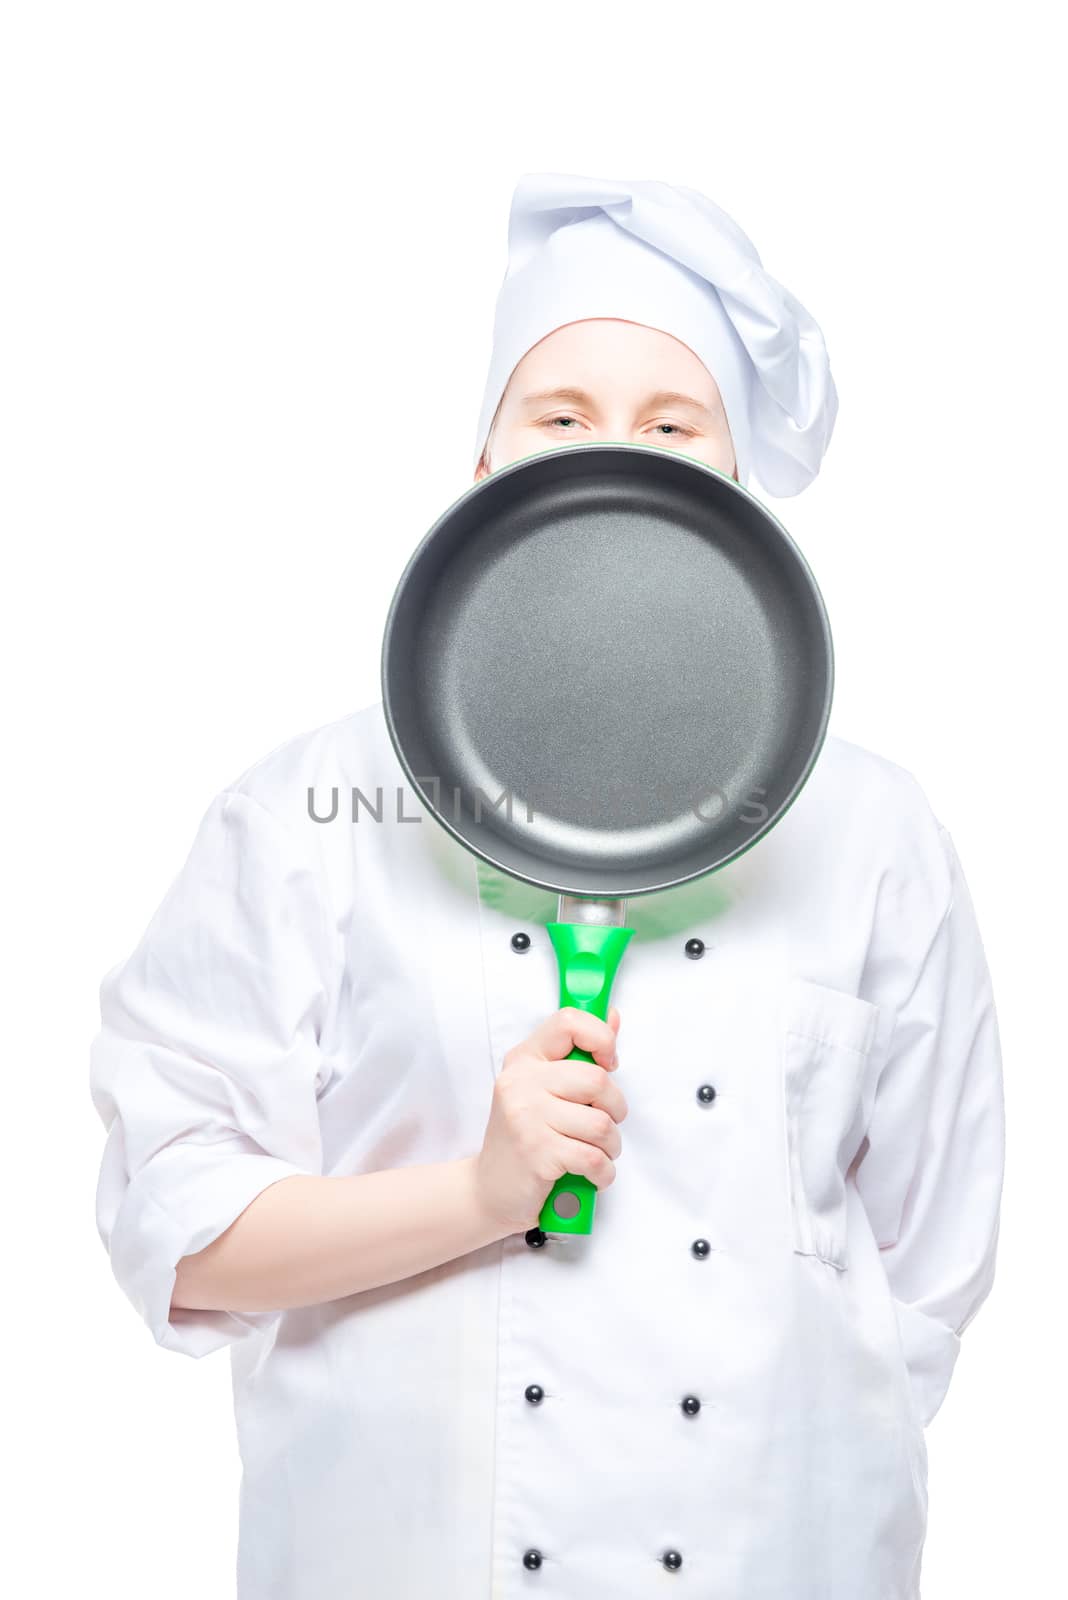 cook peeking from behind the frying pan, studio shot on white by kosmsos111